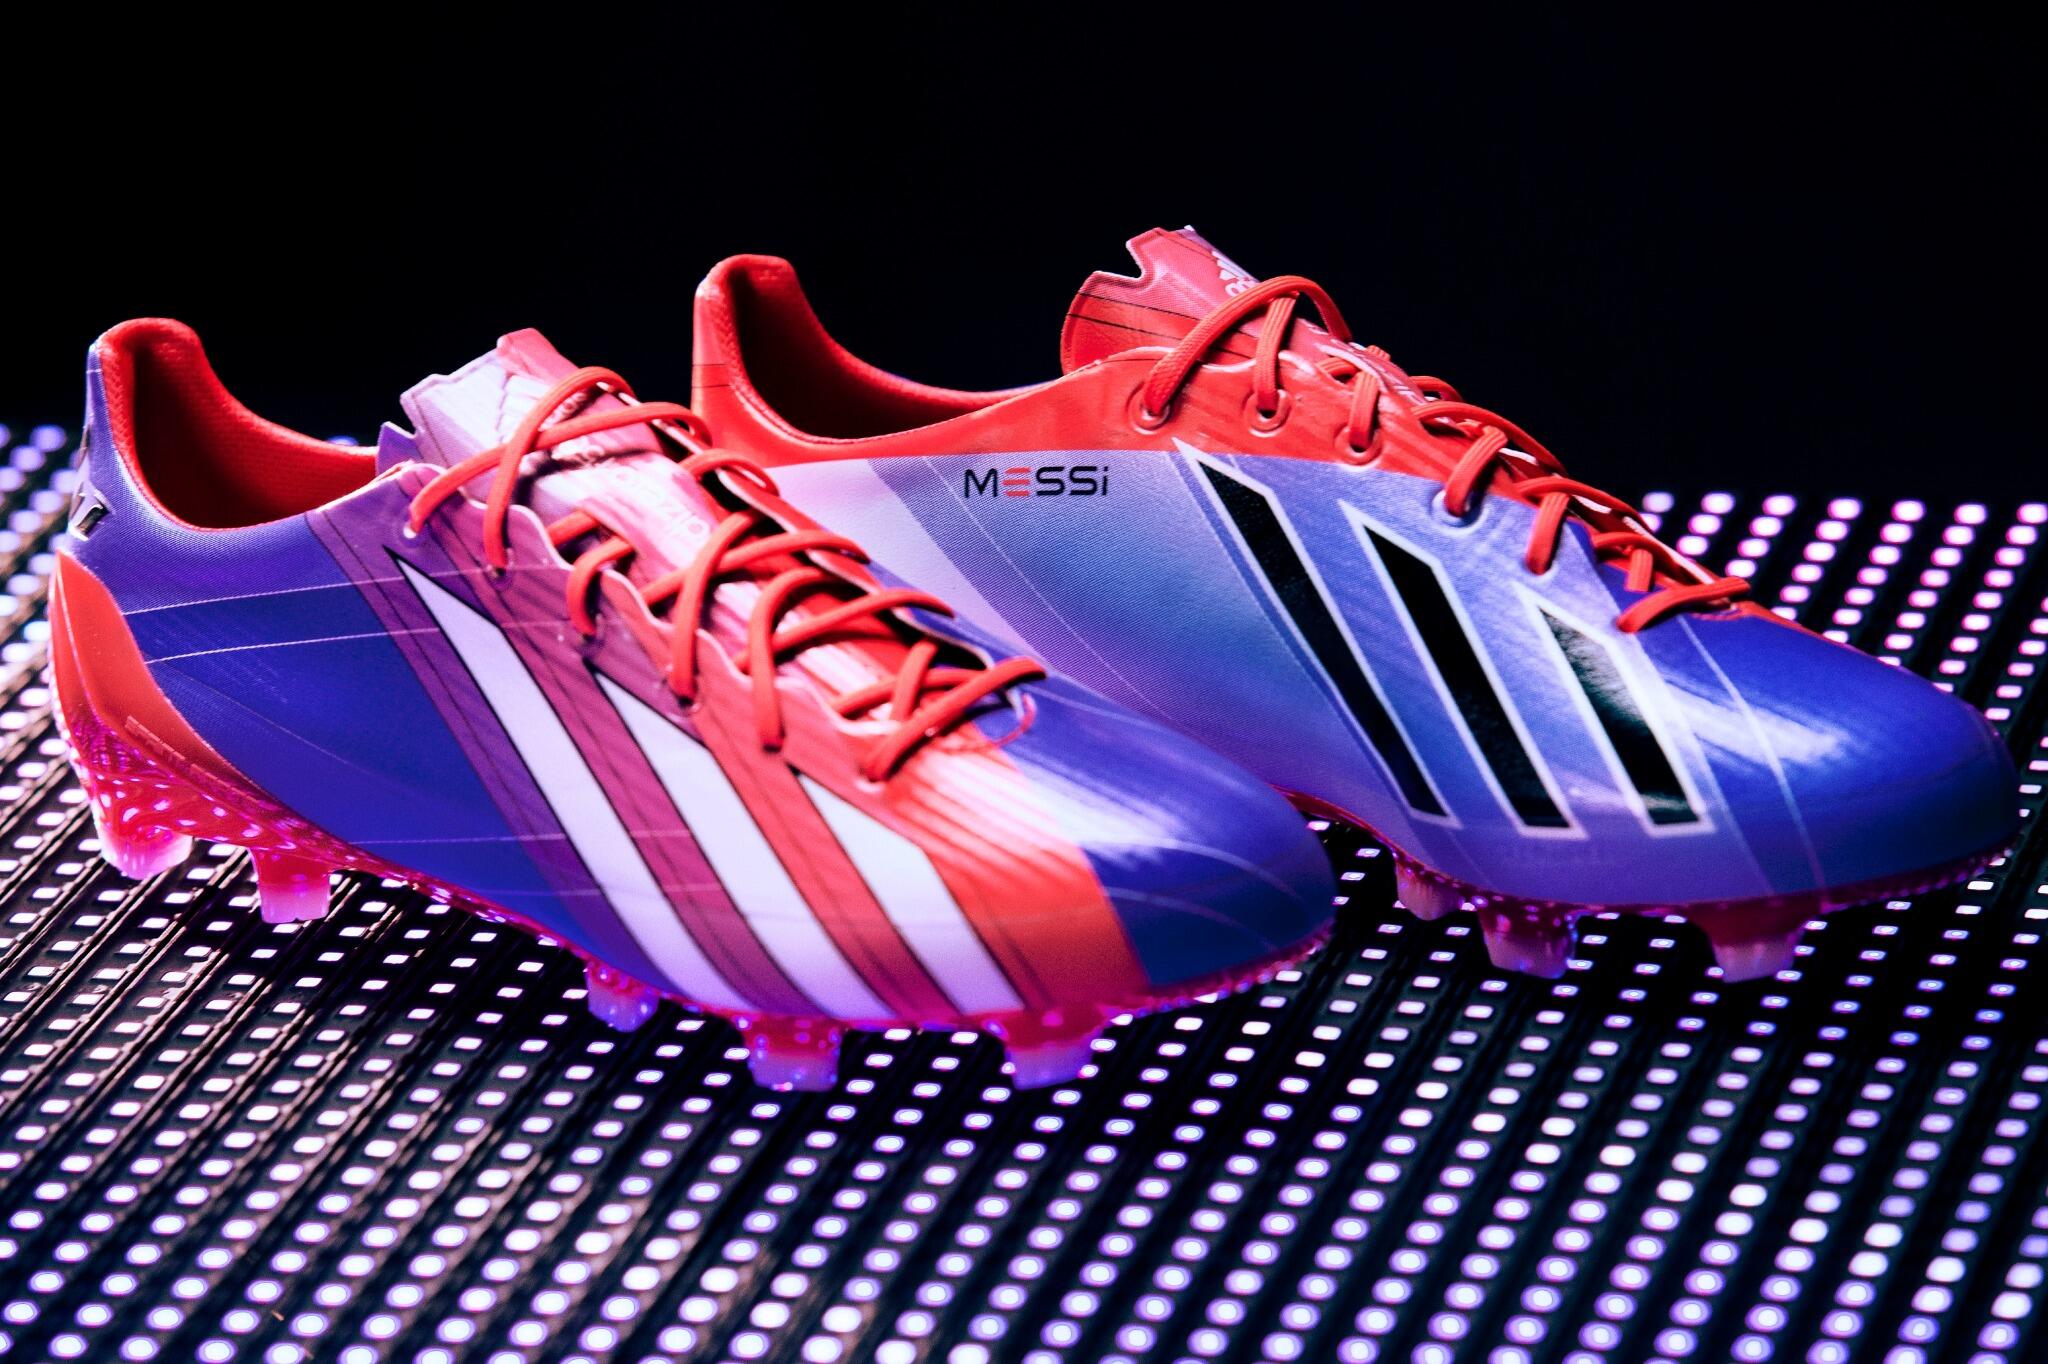 moneda guirnalda asqueroso adidas Football on Twitter: "Play the Messi Way at the speed of light. This  is the new adizero f50 Messi http://t.co/I8rP01X9nV" / Twitter